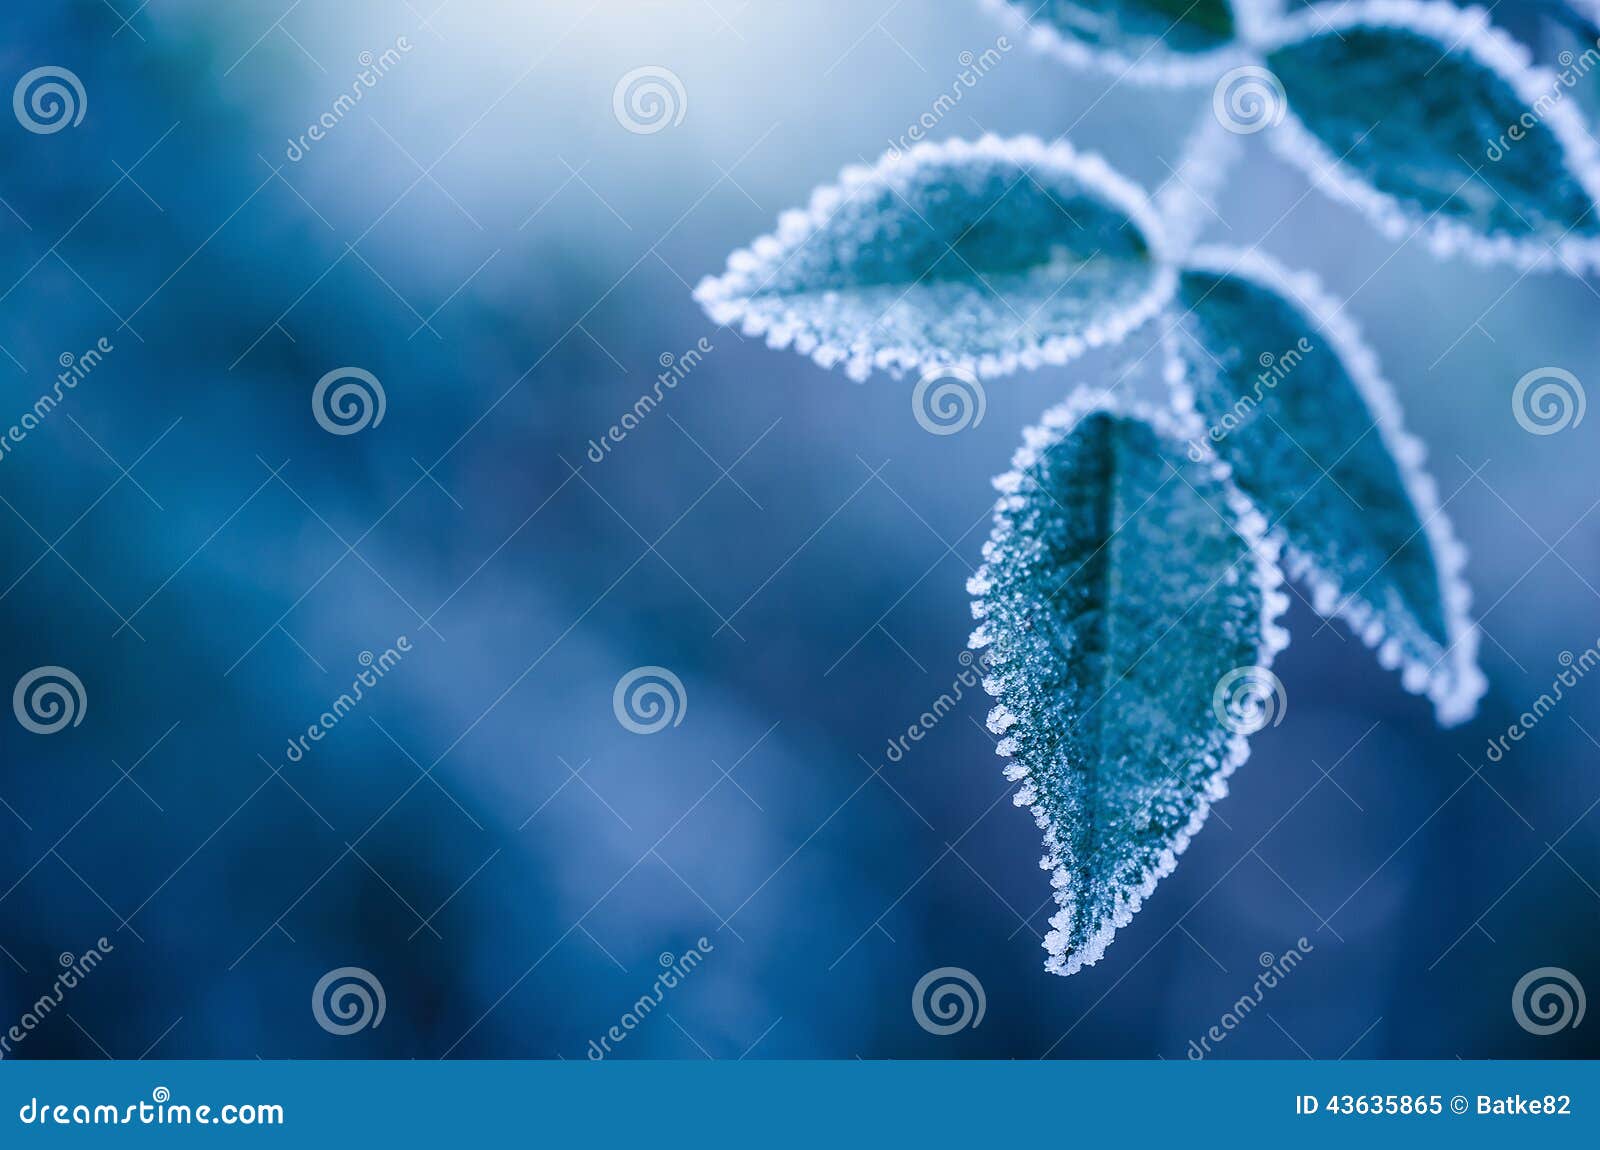 frosty winter leaves - abstract